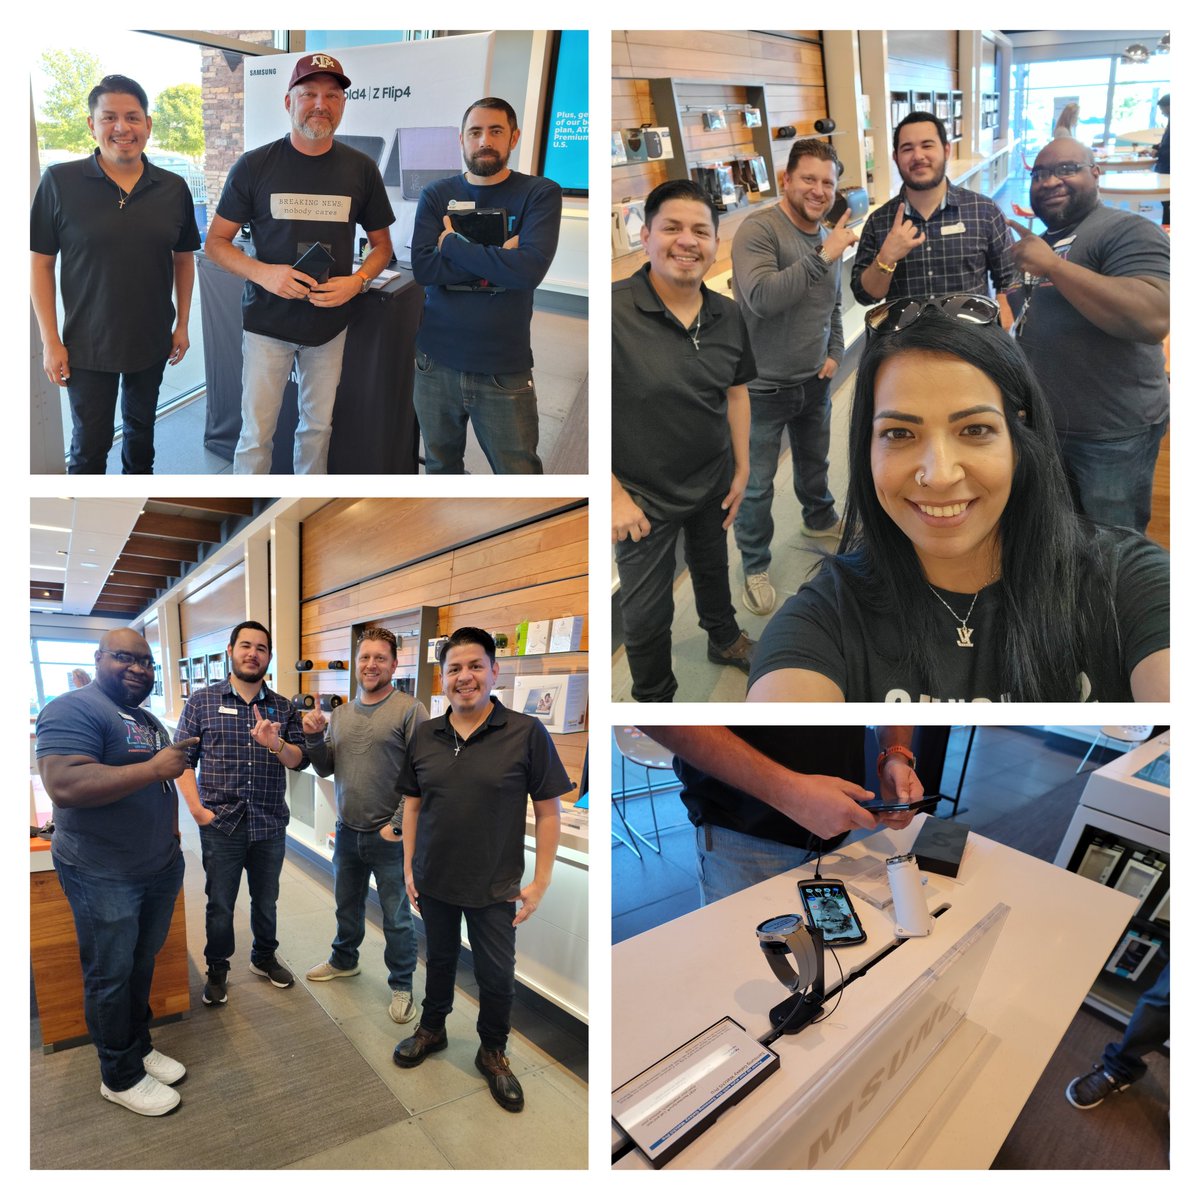 Great cee and RAL in Mansfield! Great partnership with store leaders and Rsa's! Trained team on top CXP’S and show them cool things on our latest devices! Focus was on elite trainings and becoming Samsung device experts @NTX_Jon @NTX_RobbieB @VRsamsung1 @israelmedinajr